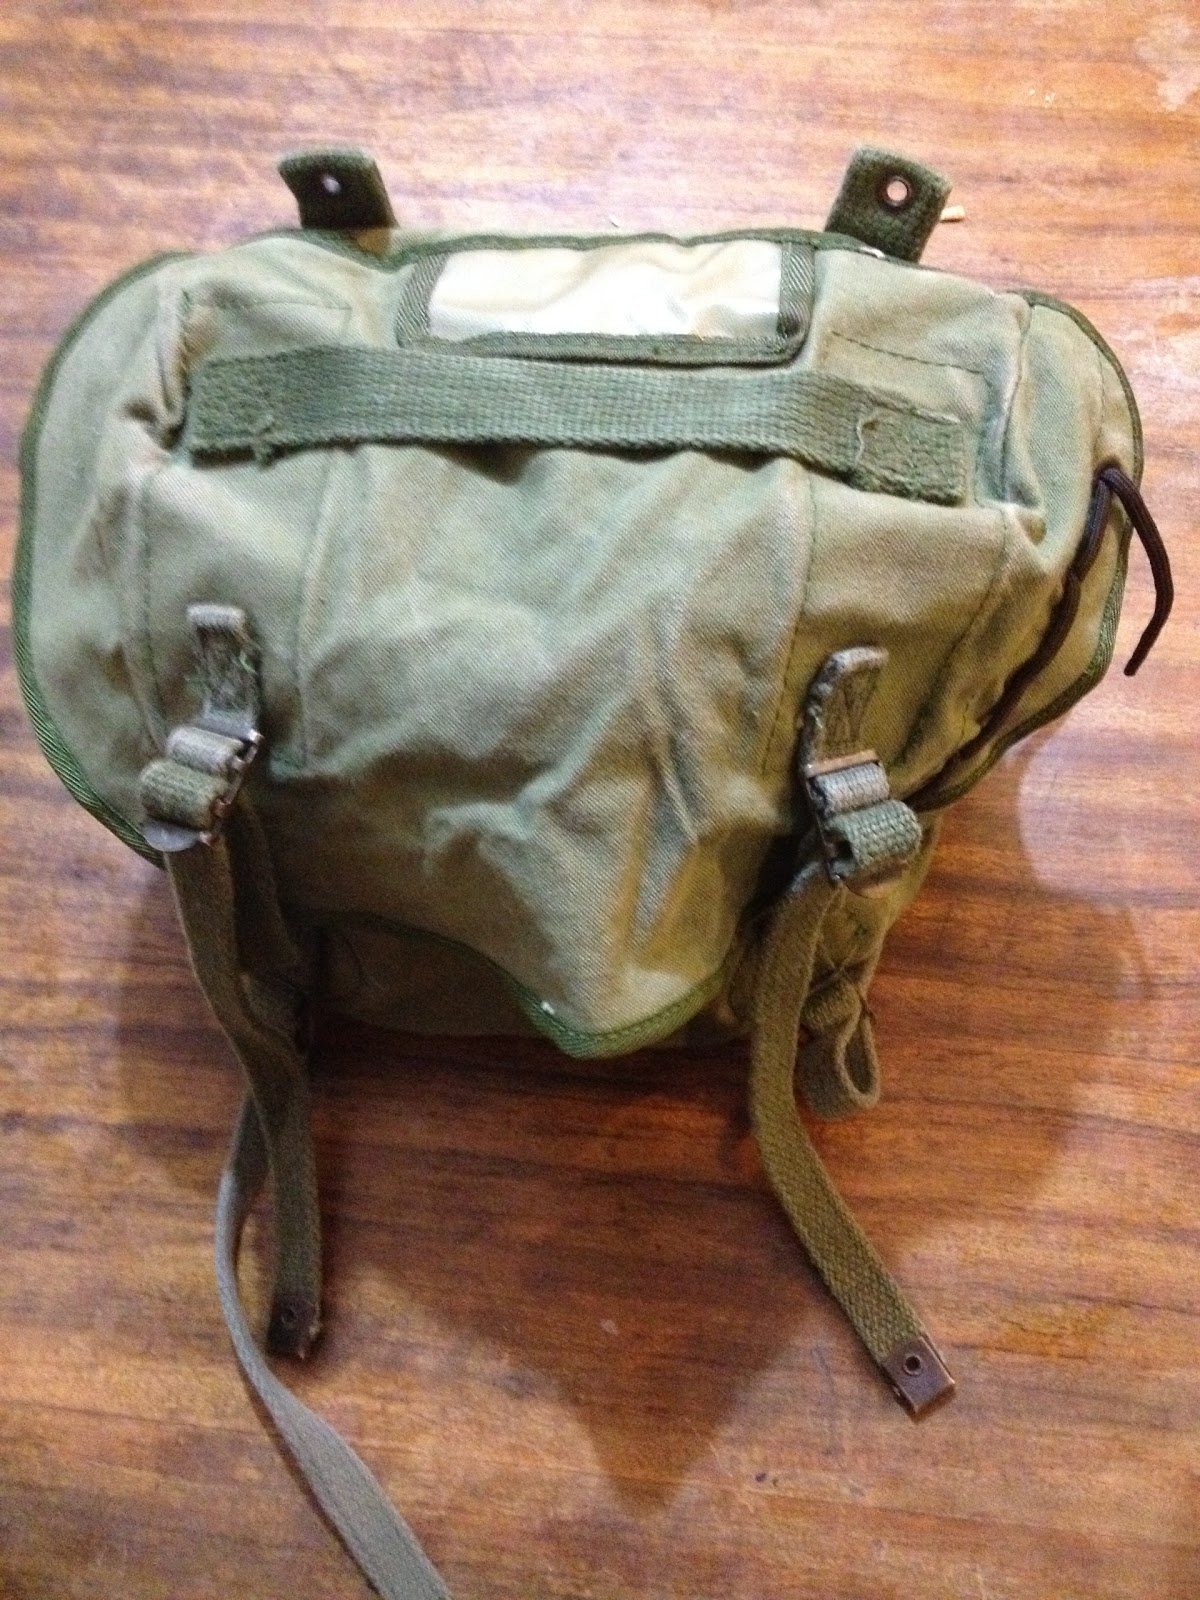 ApocalypseEquipped: Review: Australian Army Butt Pack